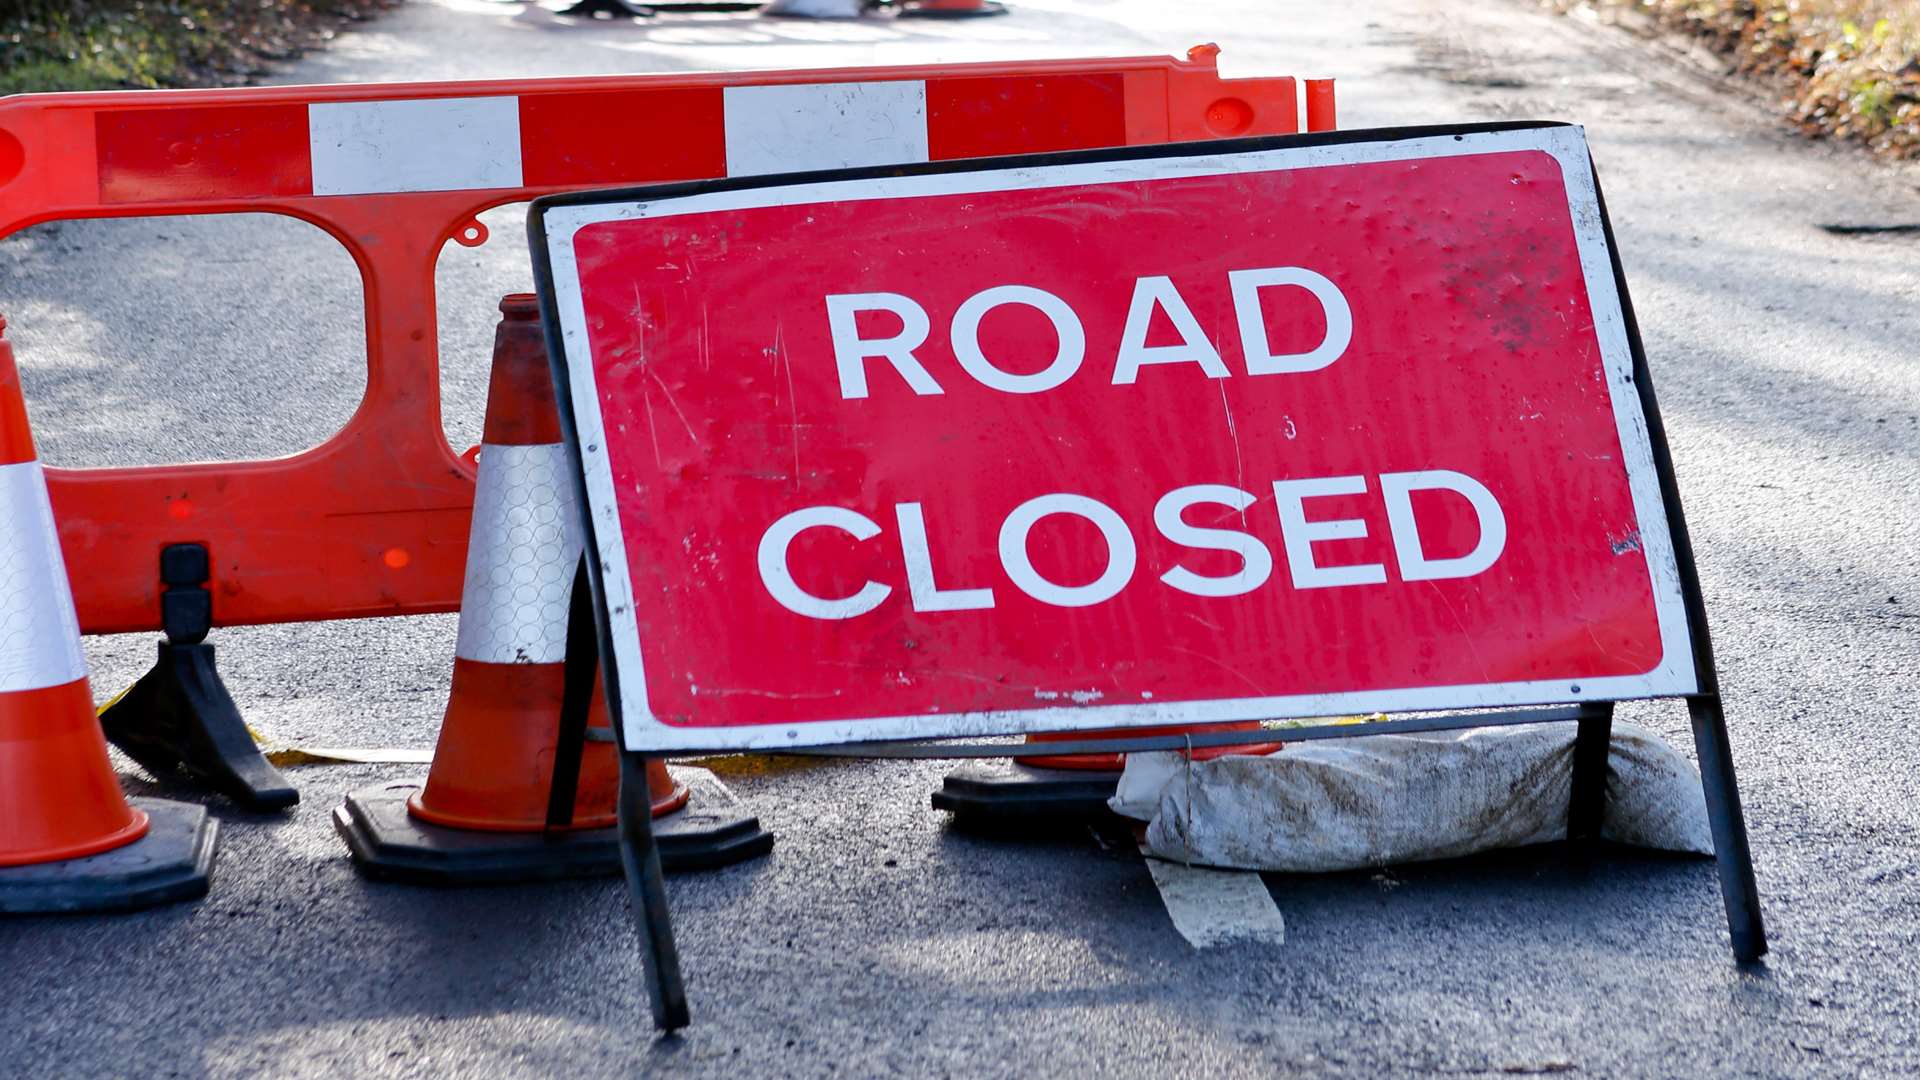 The road will be closed while repairs are made to a burst water main